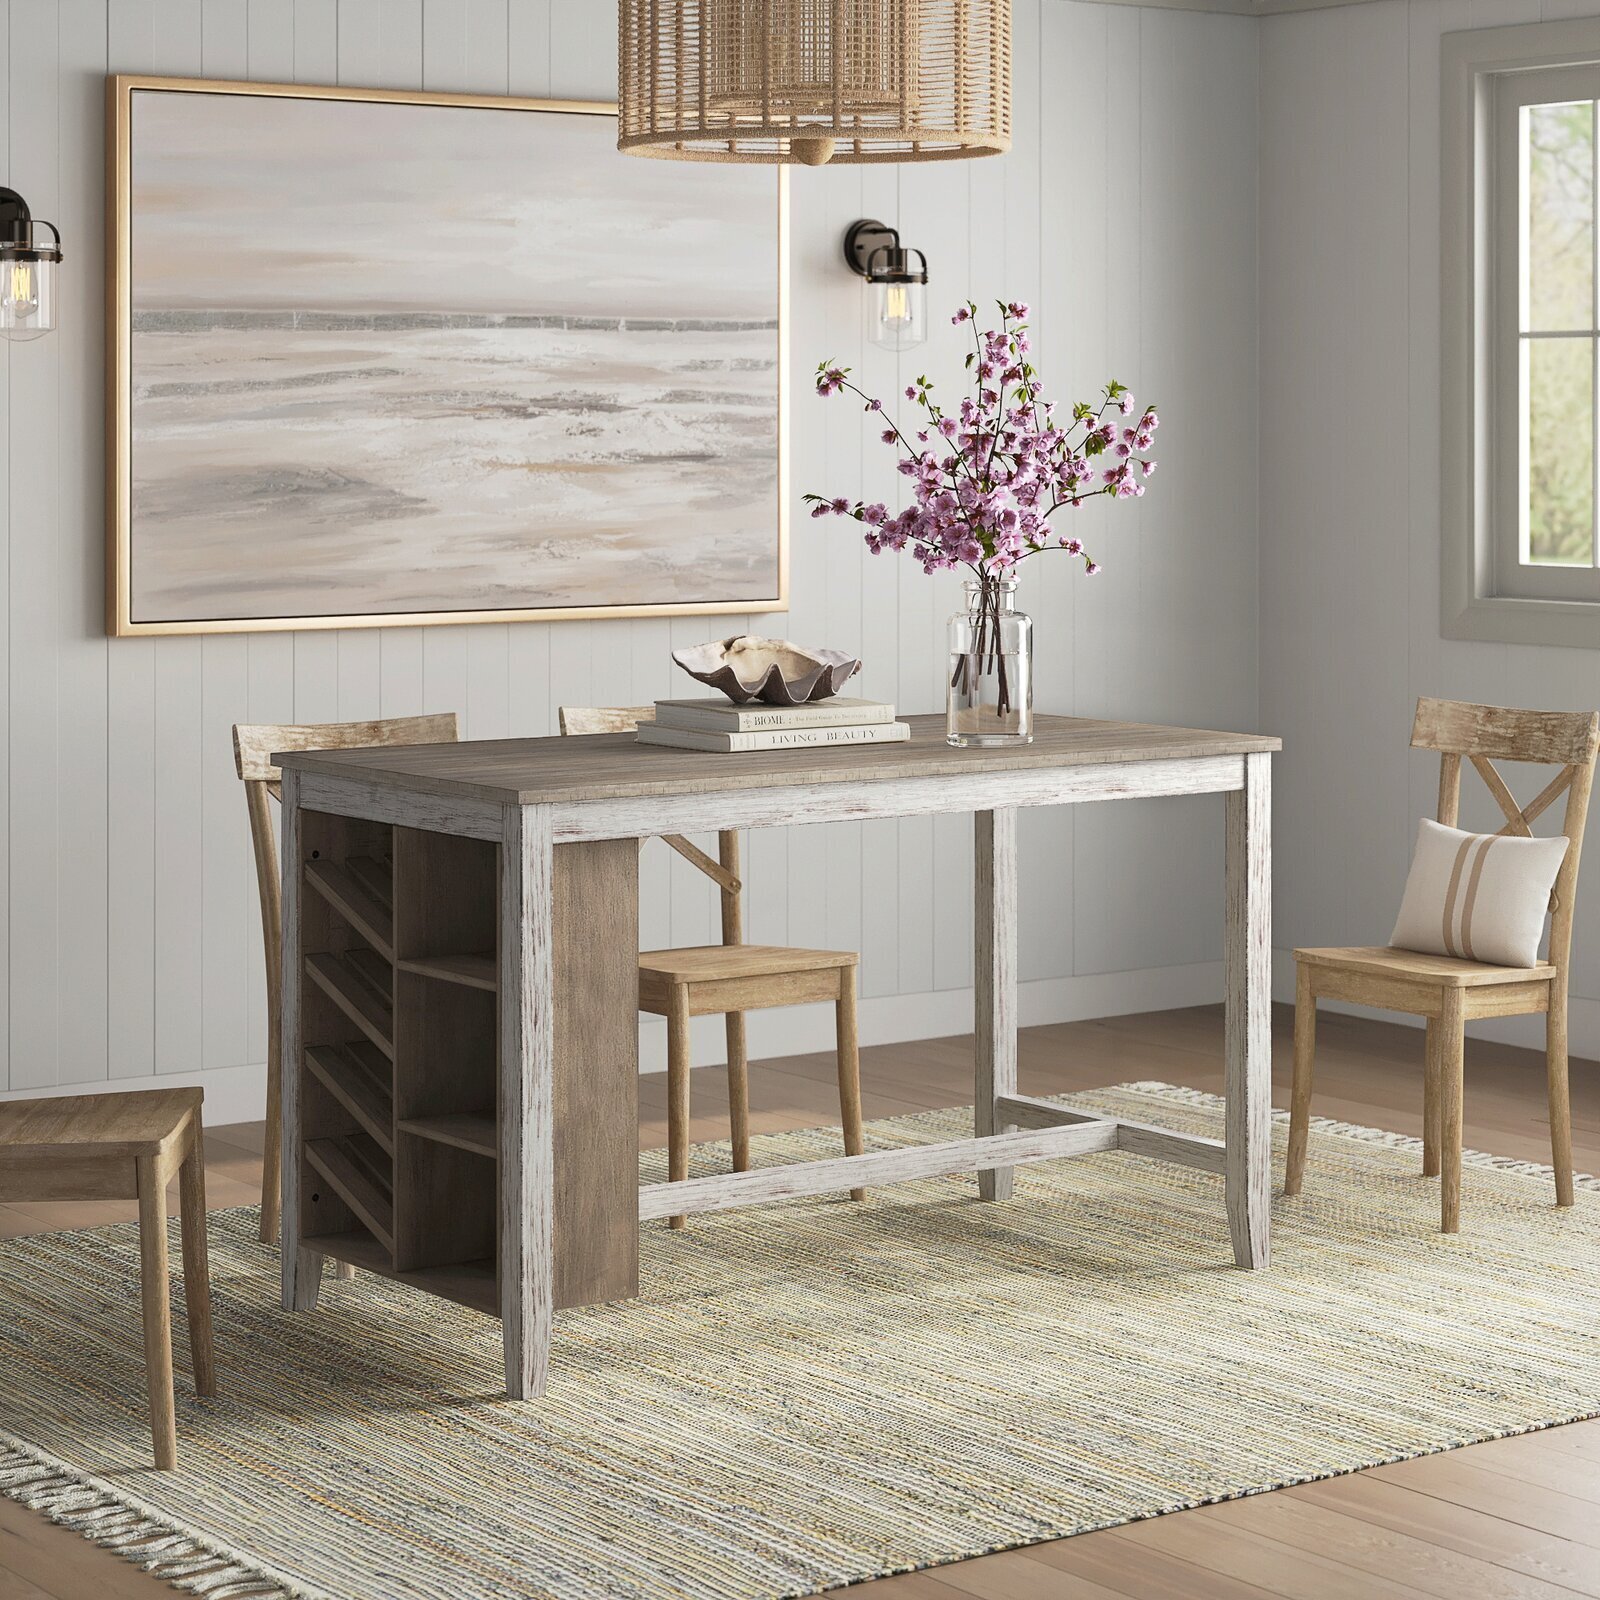 Small Kitchen Table with Storage